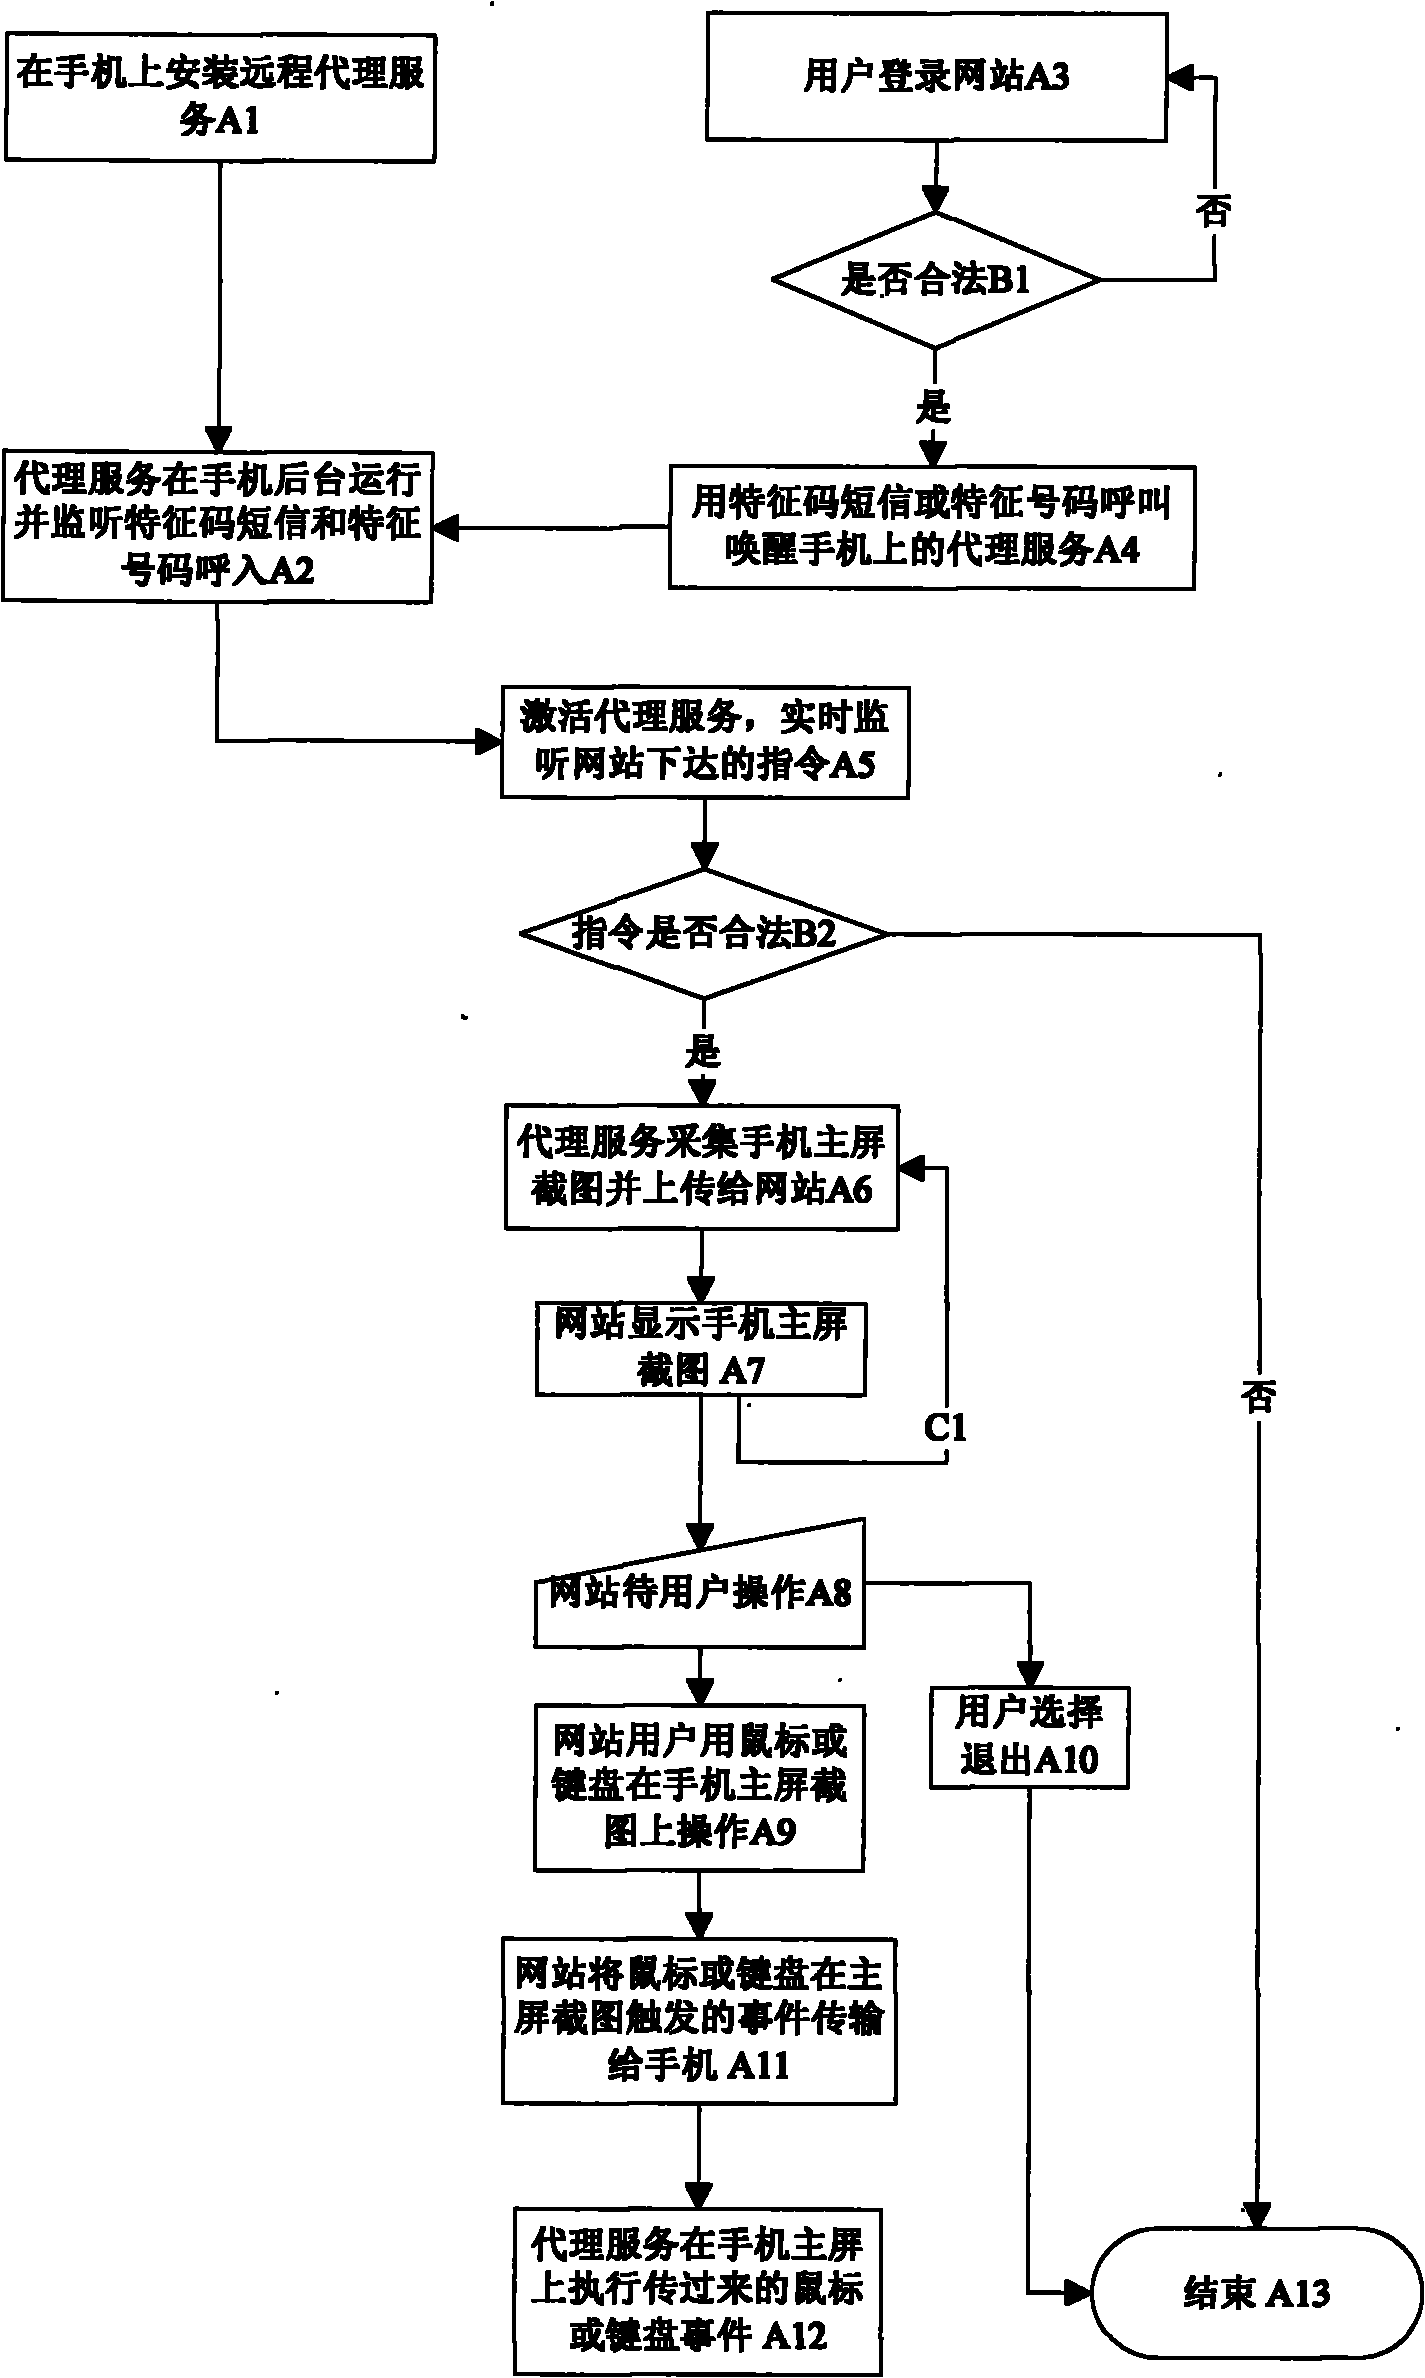 Remote-operated mobile phone system and visualized operation method thereof by utilizing webpage